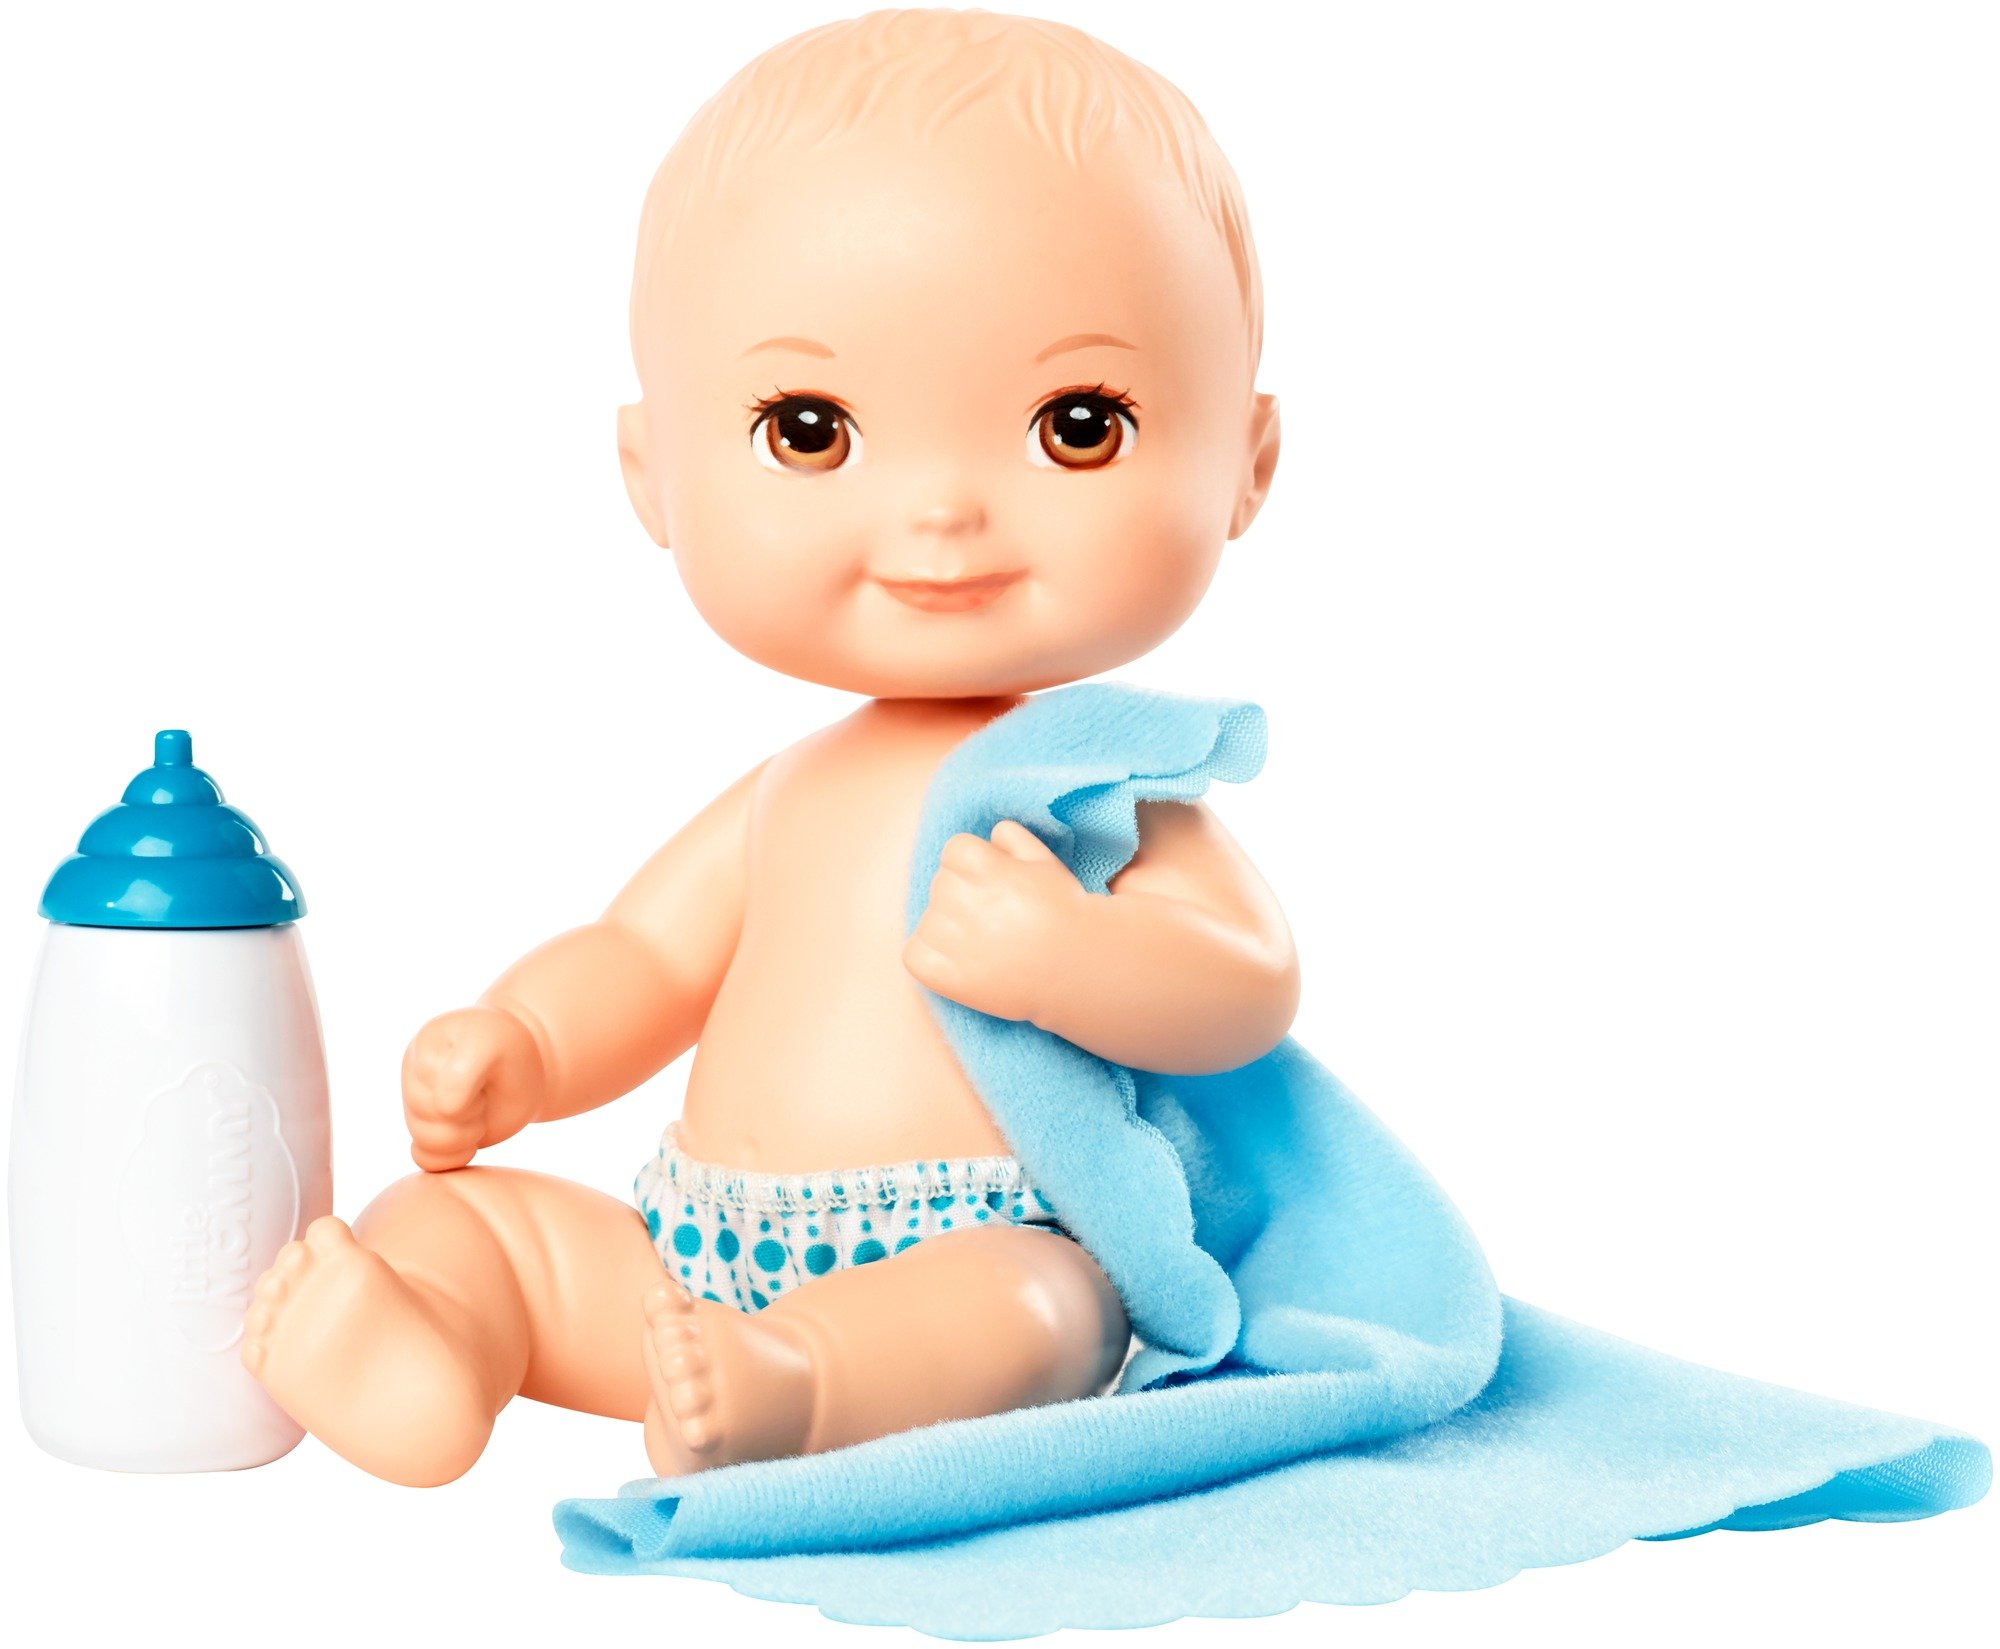 Little Mommy Mini Baby Nurture and Care Doll 3 - Blue Bottle - image 2 of 3